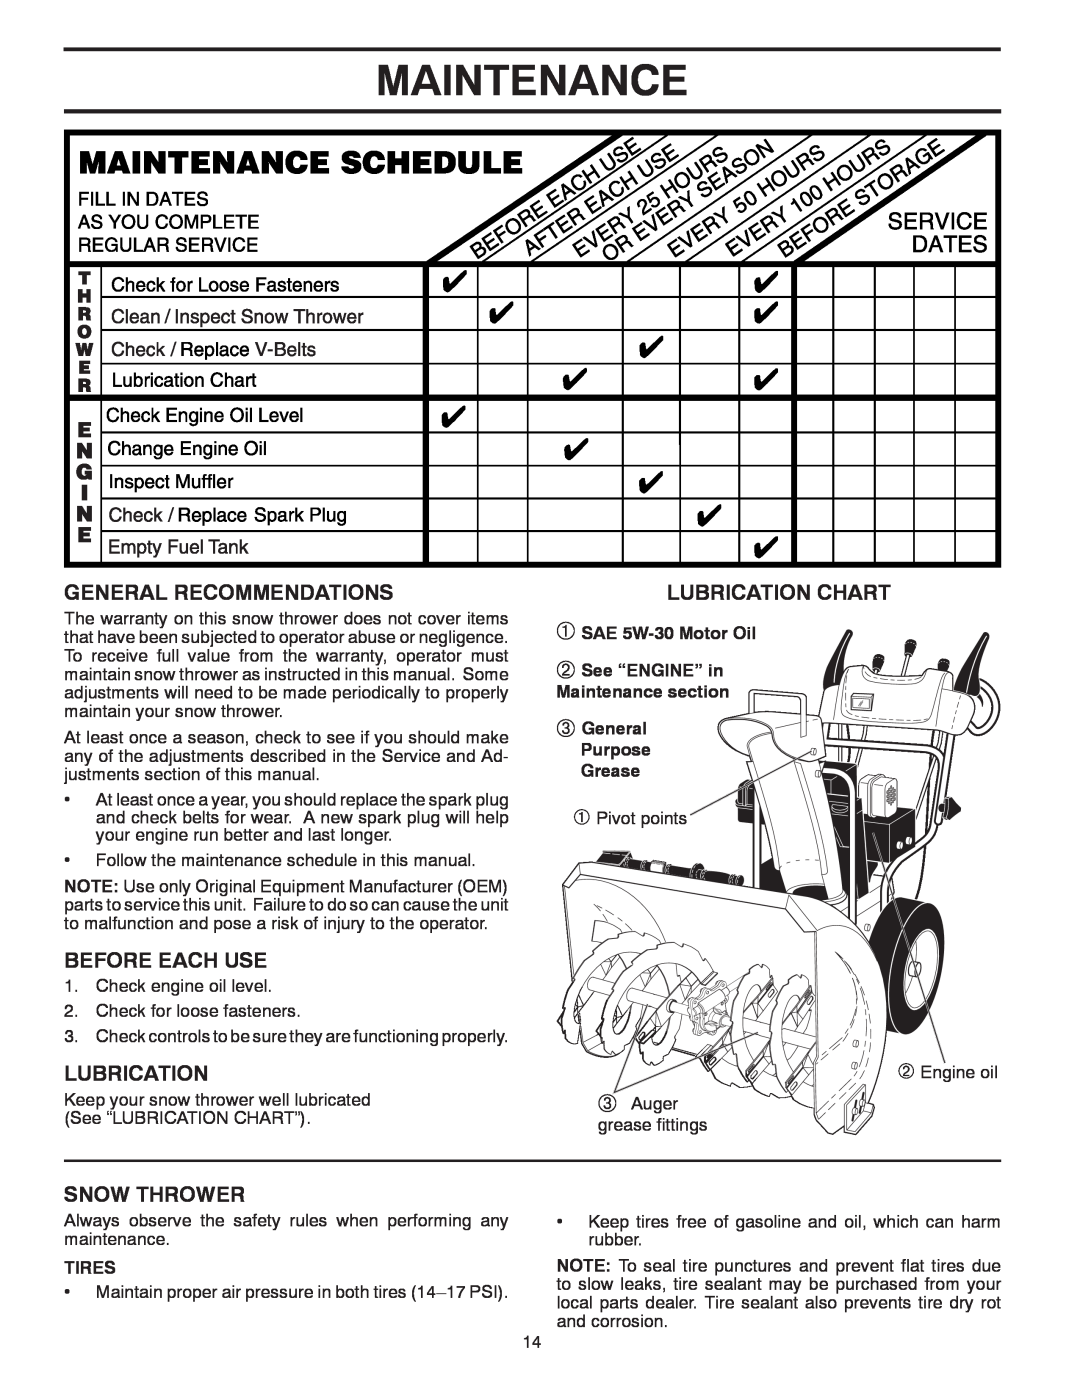 Poulan 429264 Maintenance, General Recommendations, Before Each Use, Snow Thrower, Lubrication Chart, Tires 